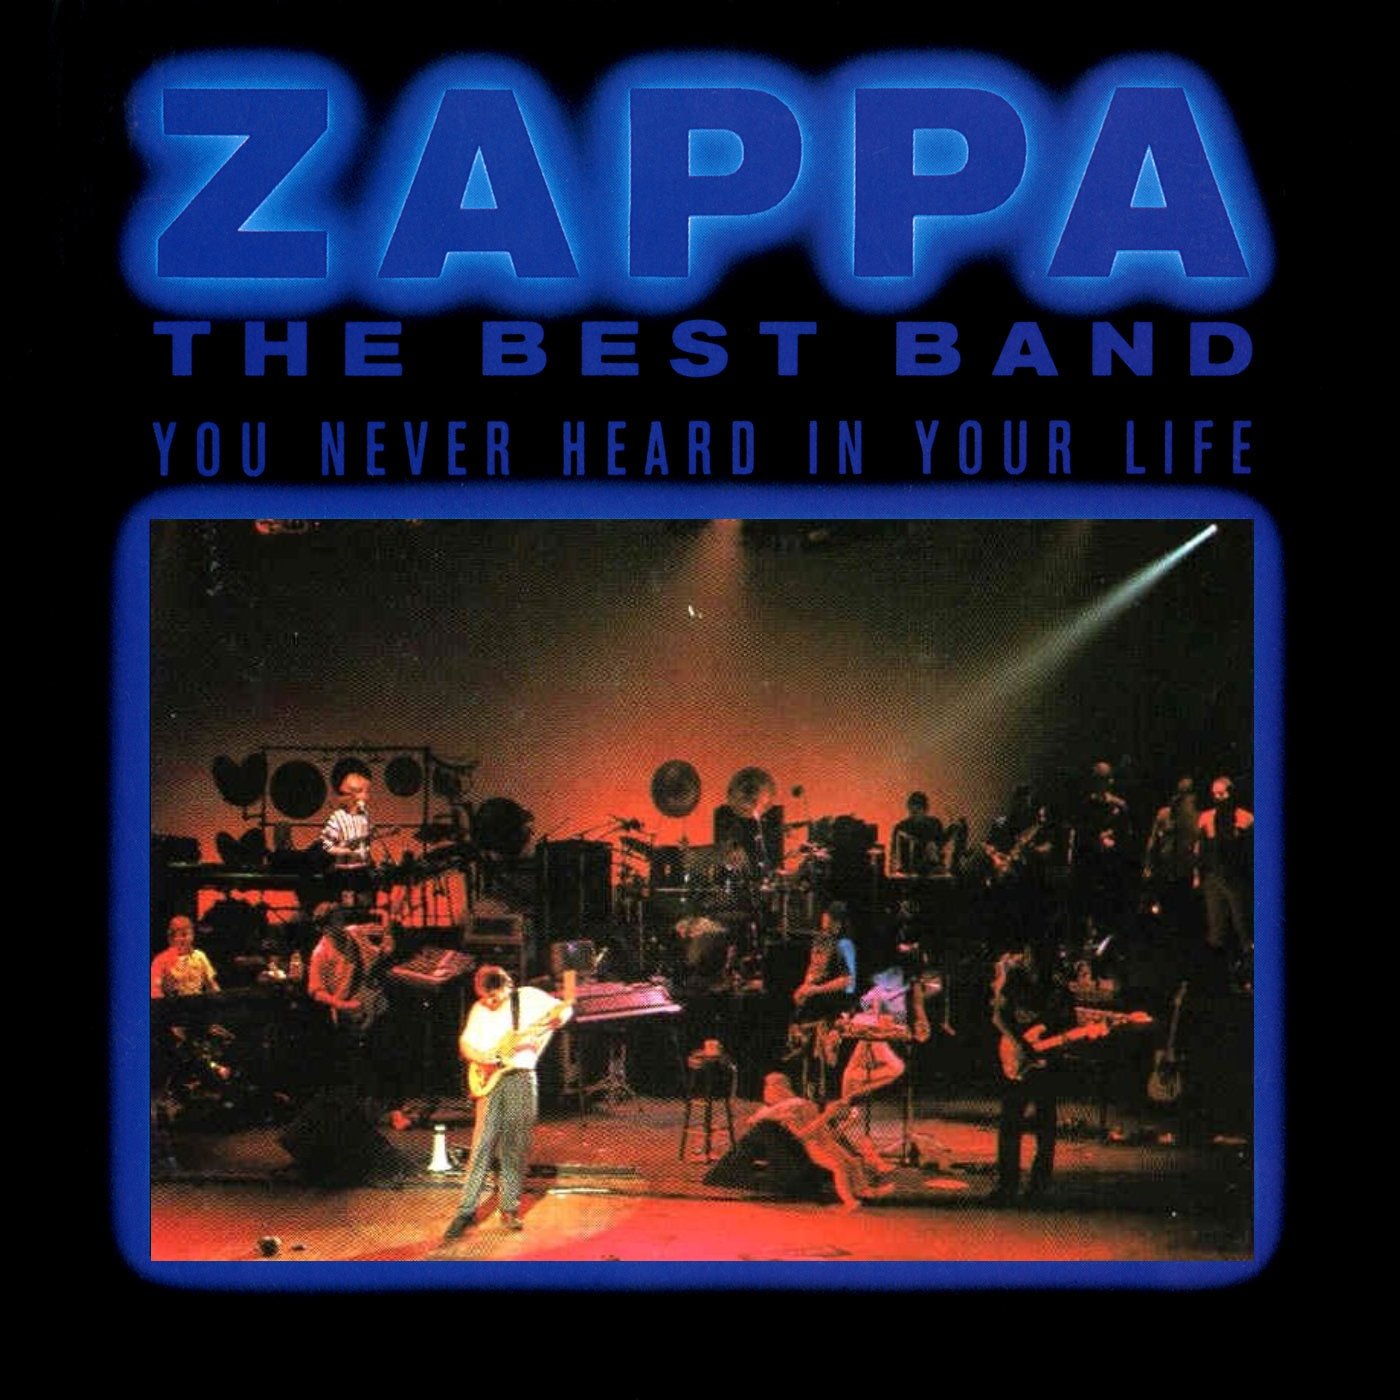 The Best Band You Never Heard in Your Life — Frank Zappa